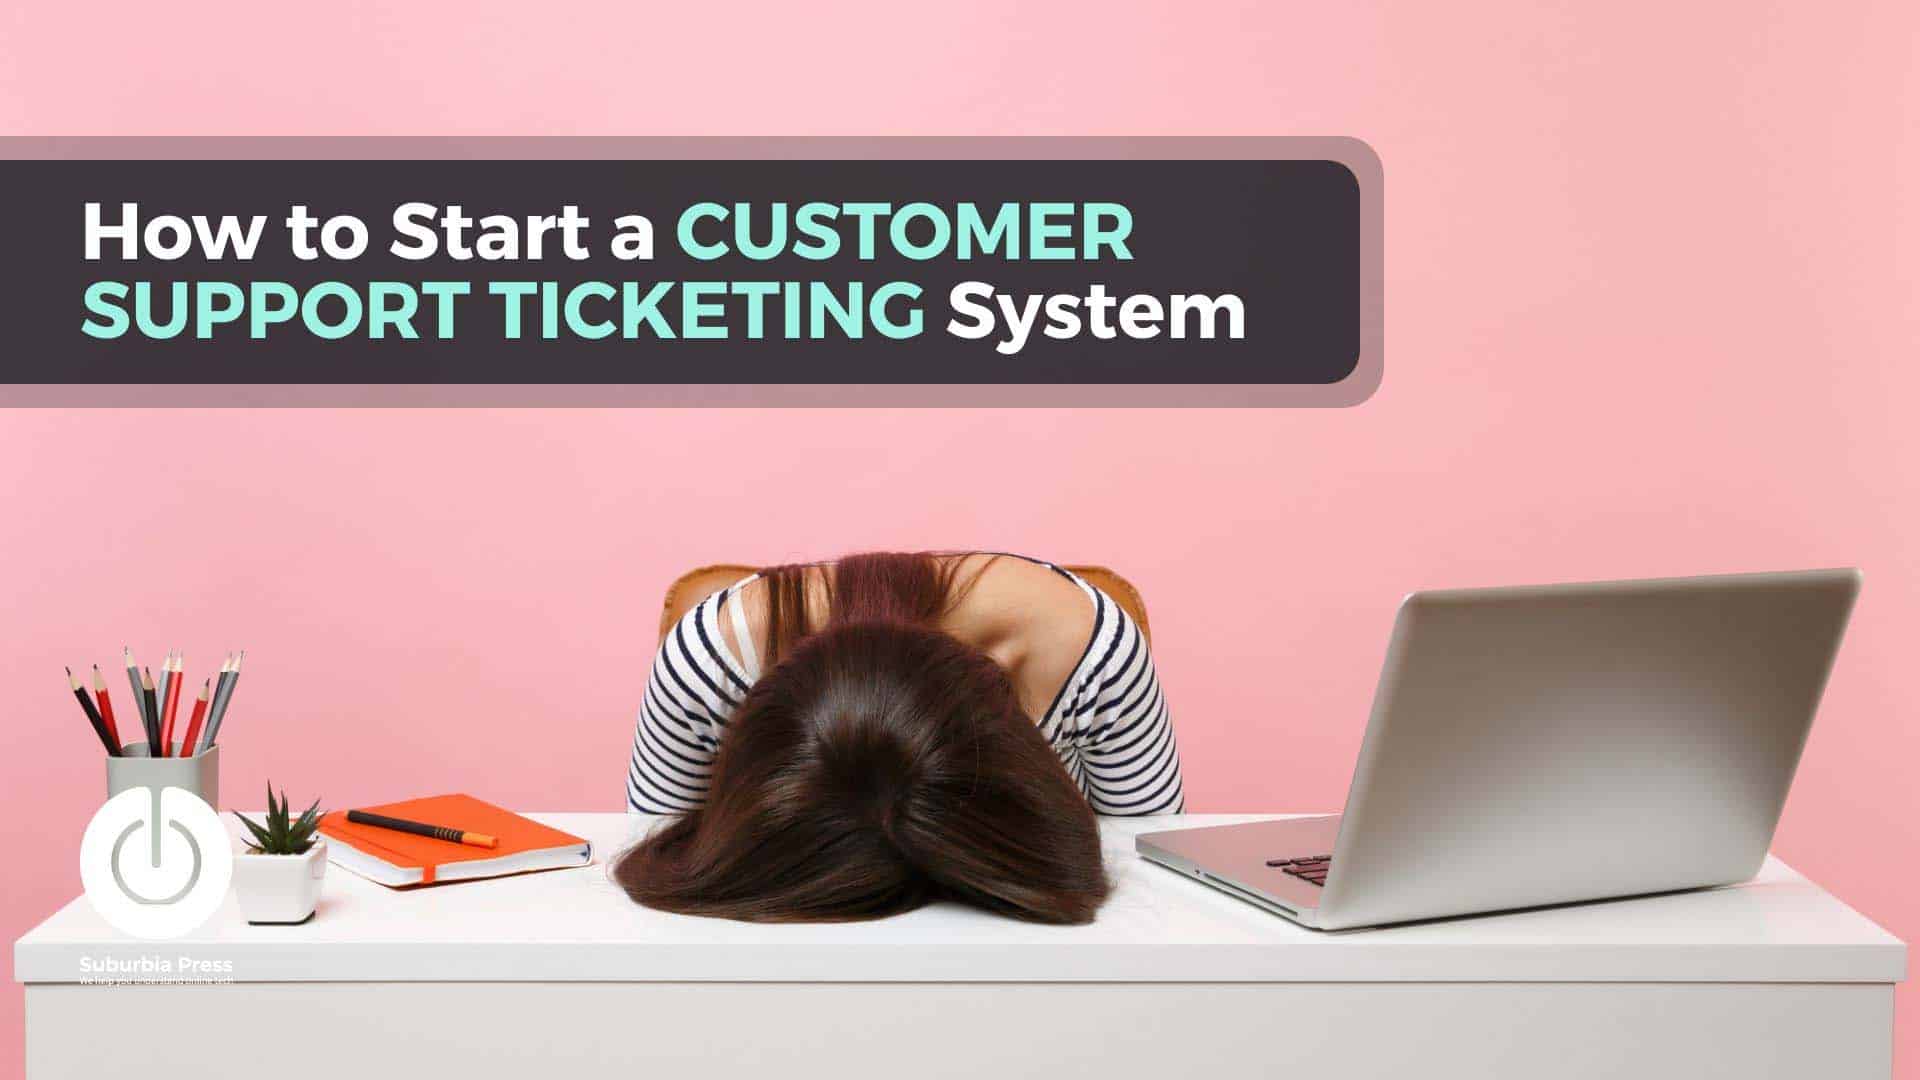 Start a Great Customer Support Ticketing System